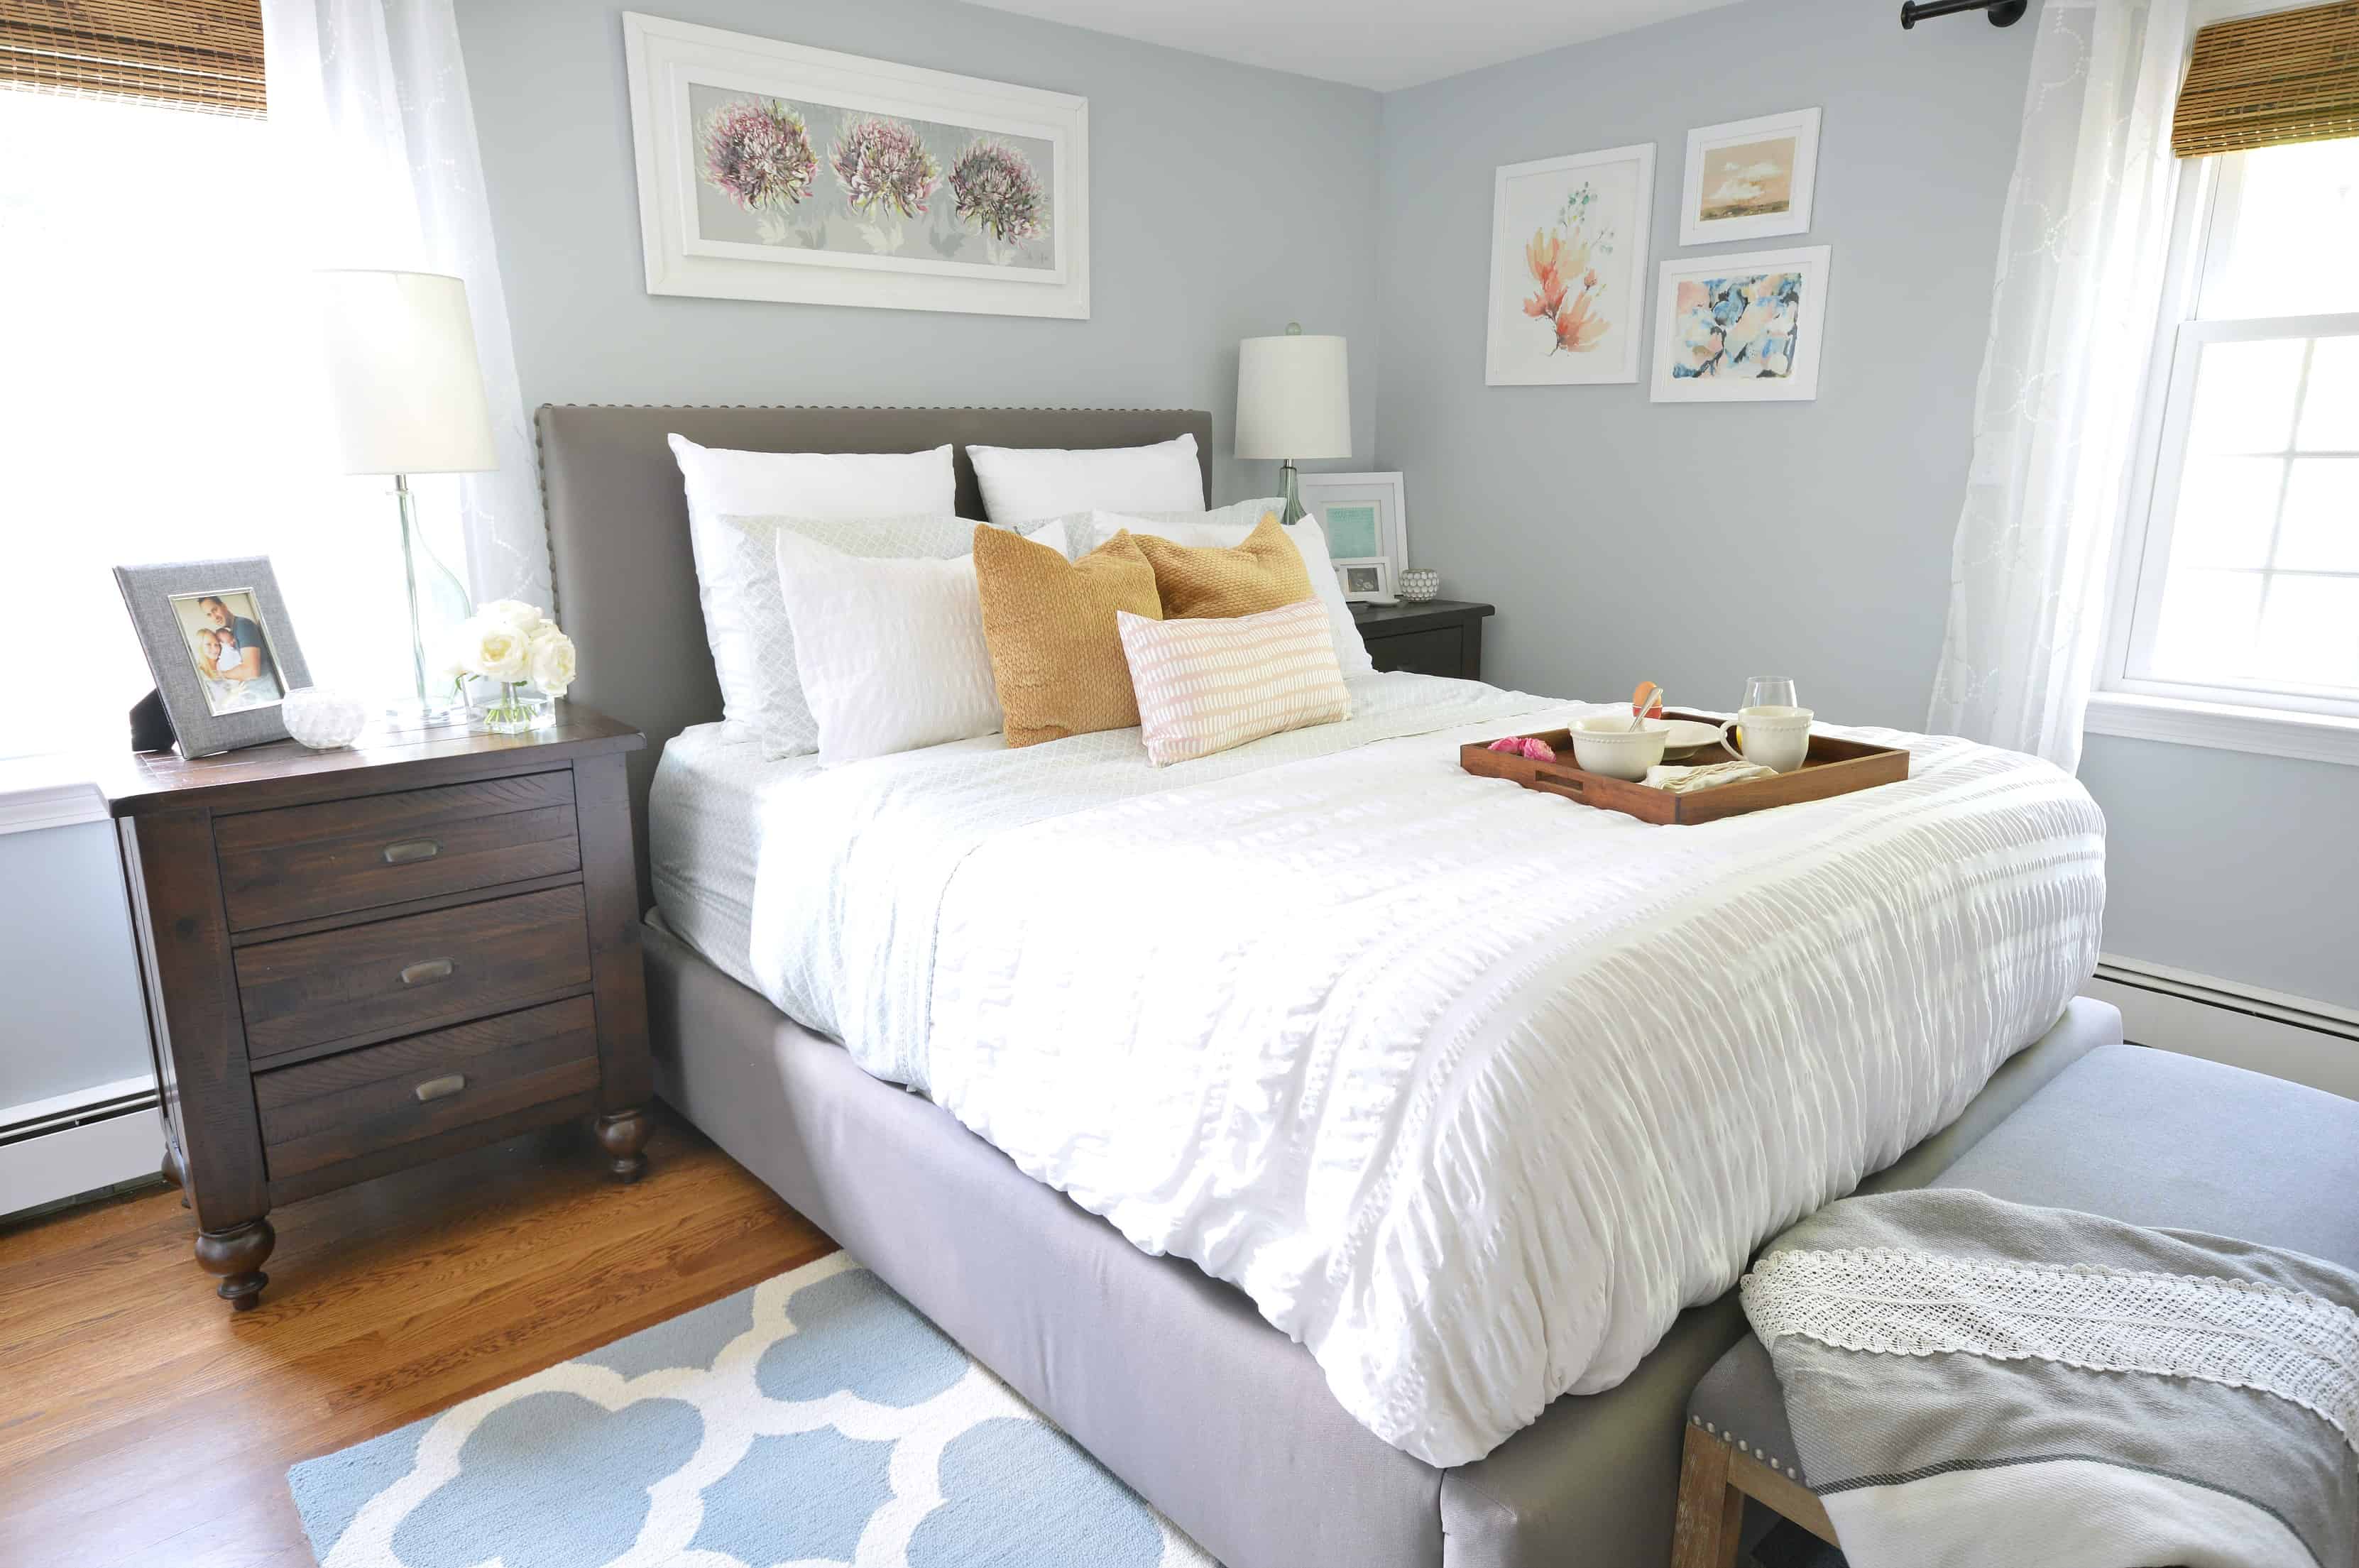 Blue bedroom paint color: Behr Light French Gray